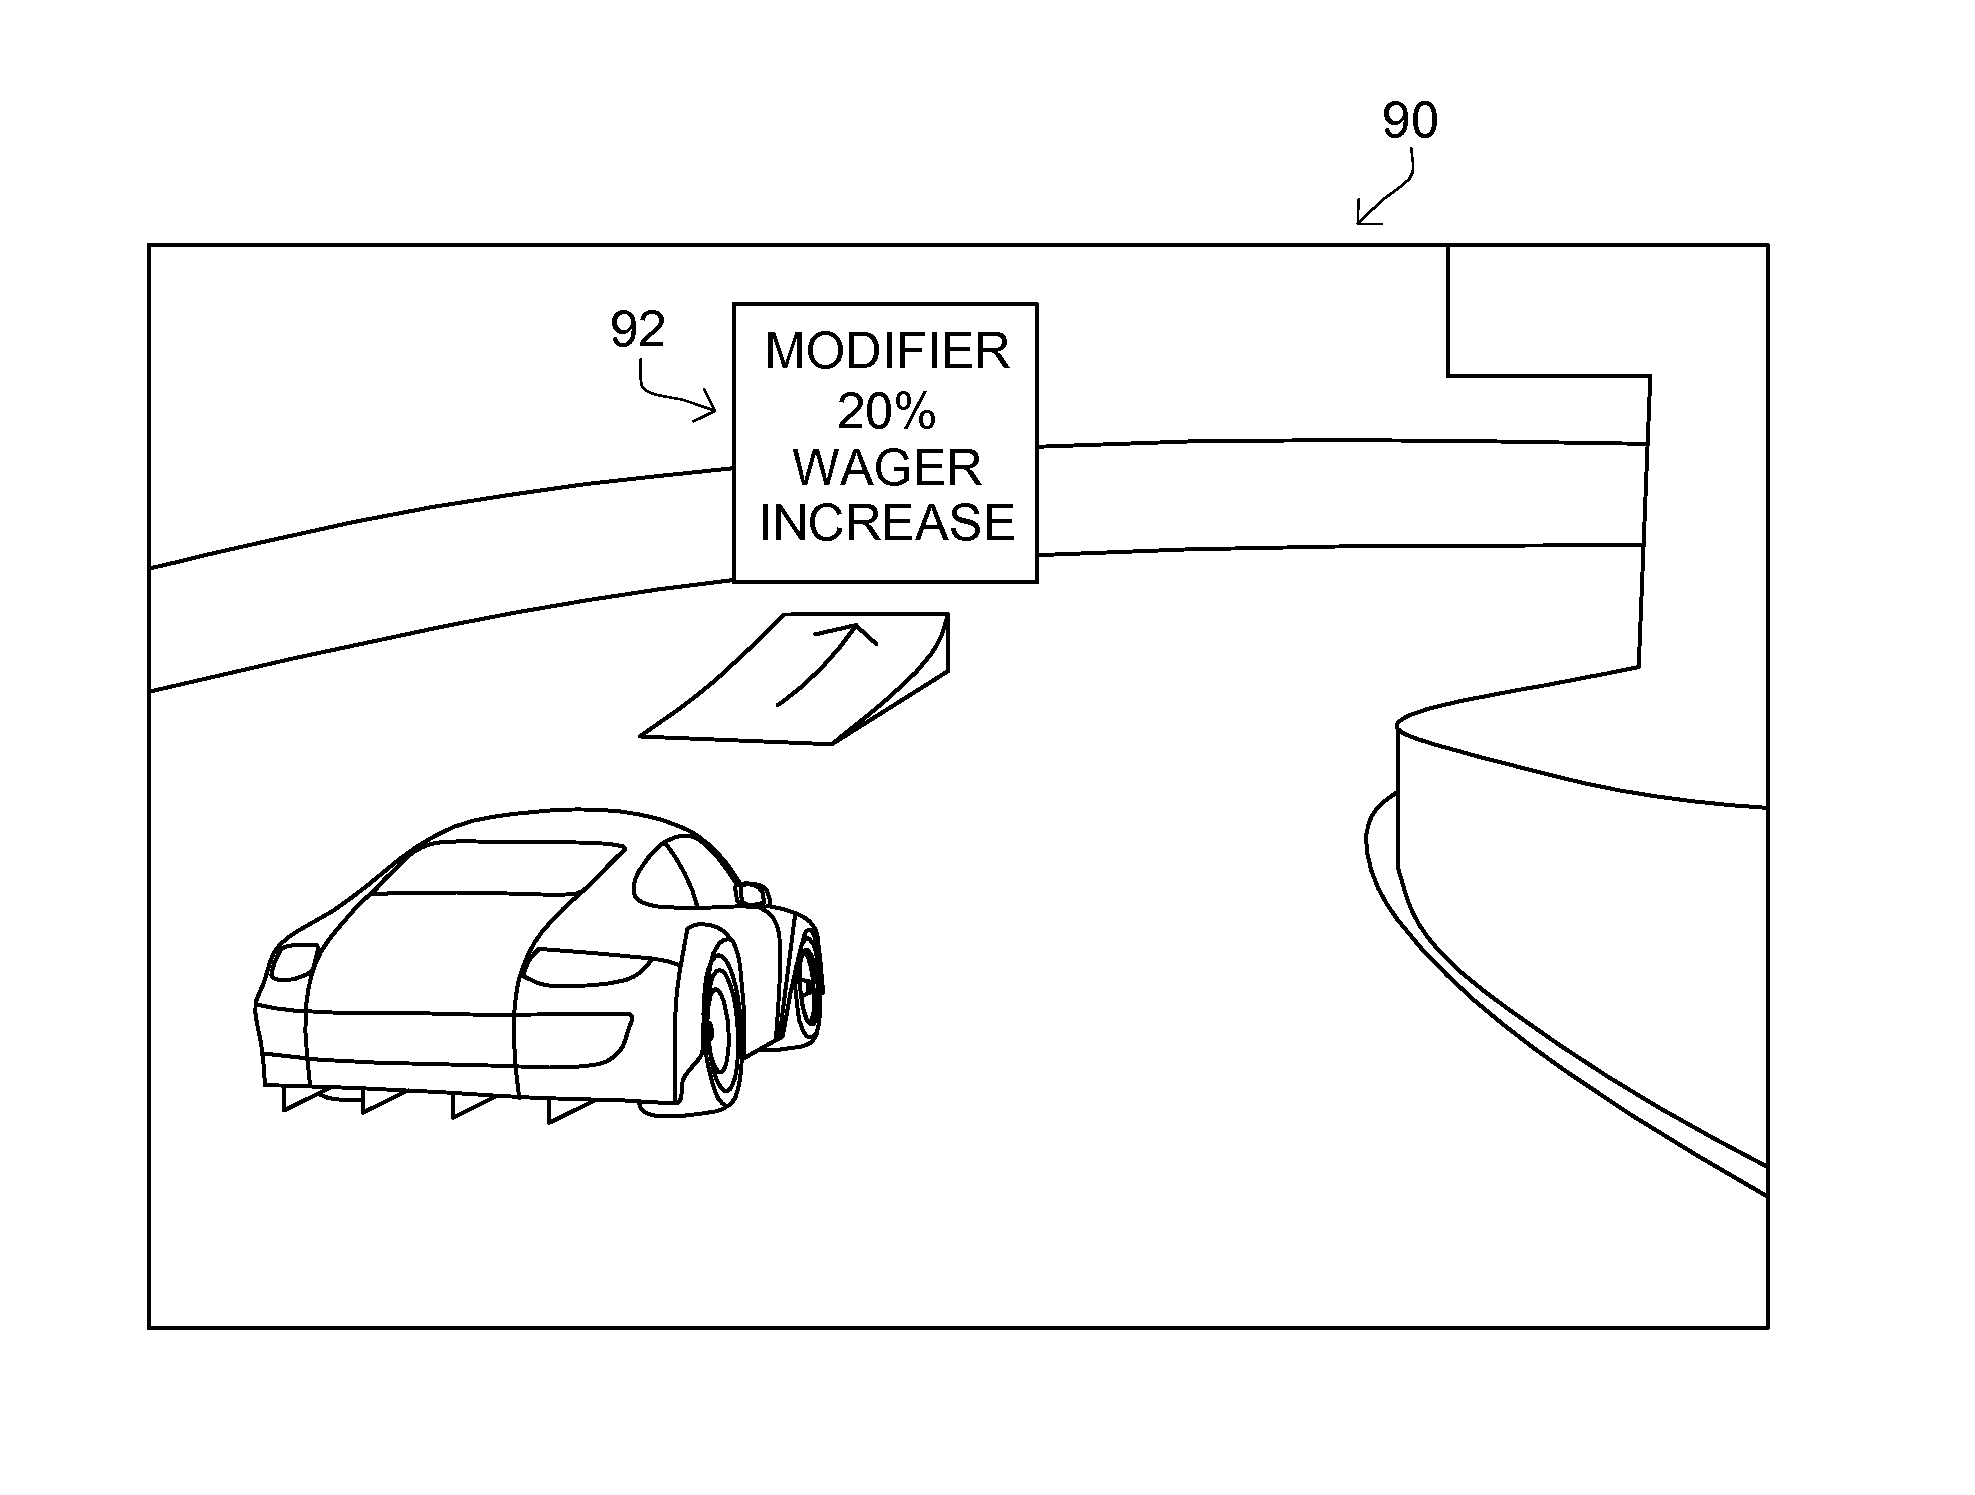 System and method of providing wagering over a computerized network